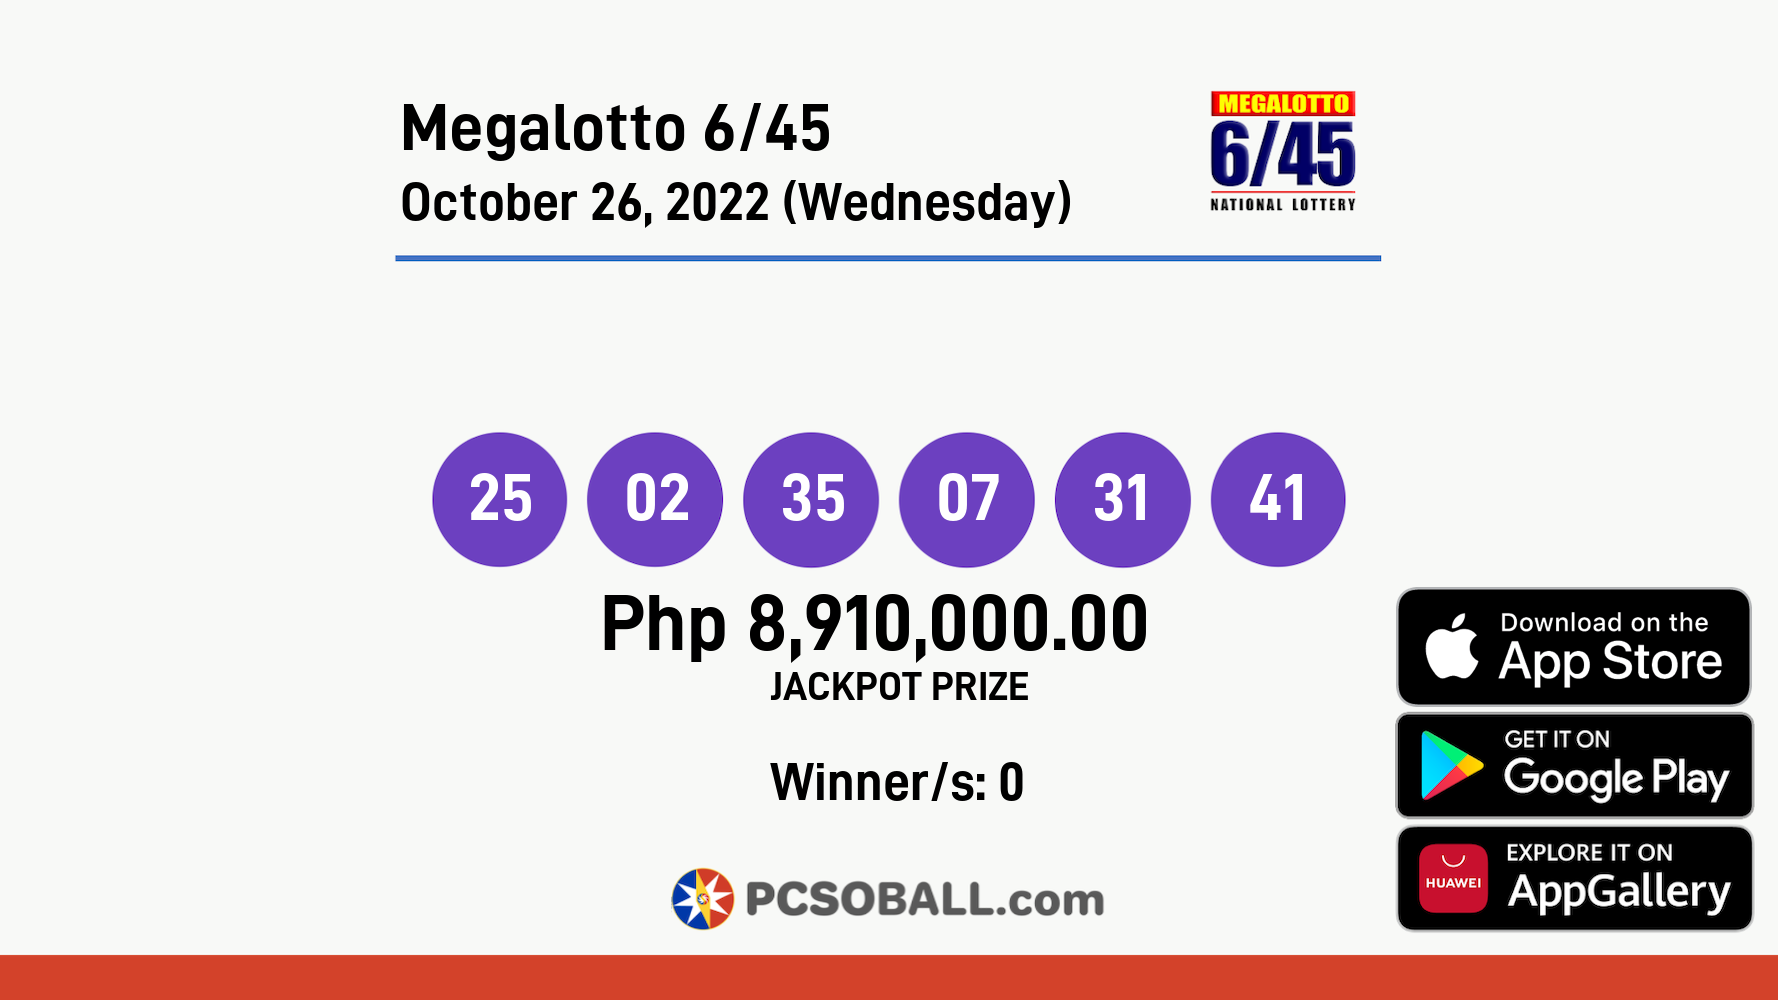 Megalotto 6/45 October 26, 2022 (Wednesday) Result